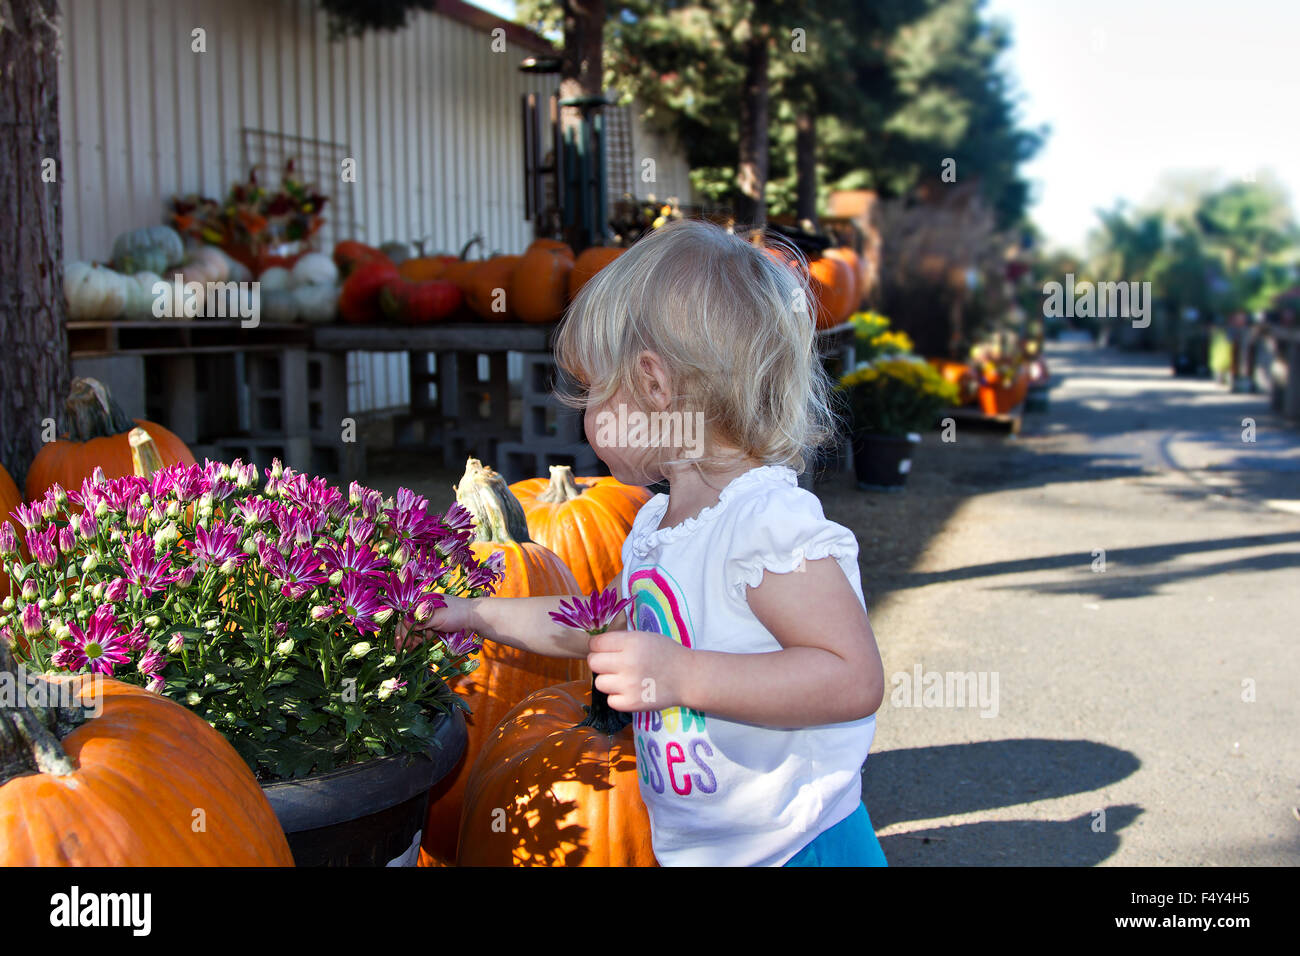 A young girl looking at a flower in front of a pumpkin display at a local nursery. Stock Photo